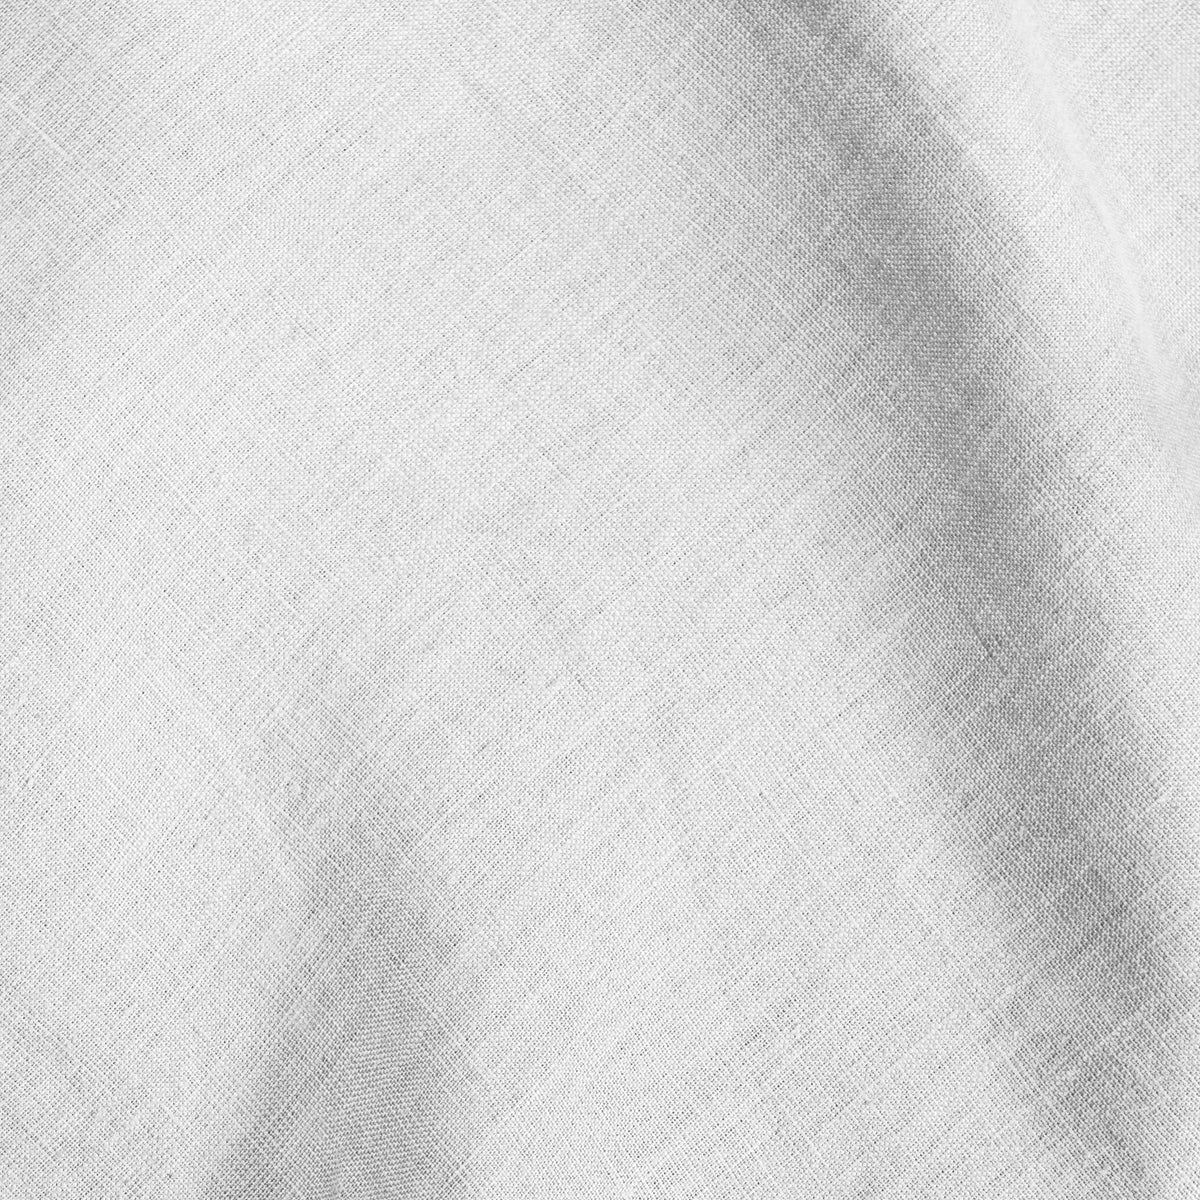 Close-up image of White Relaxed Hemp